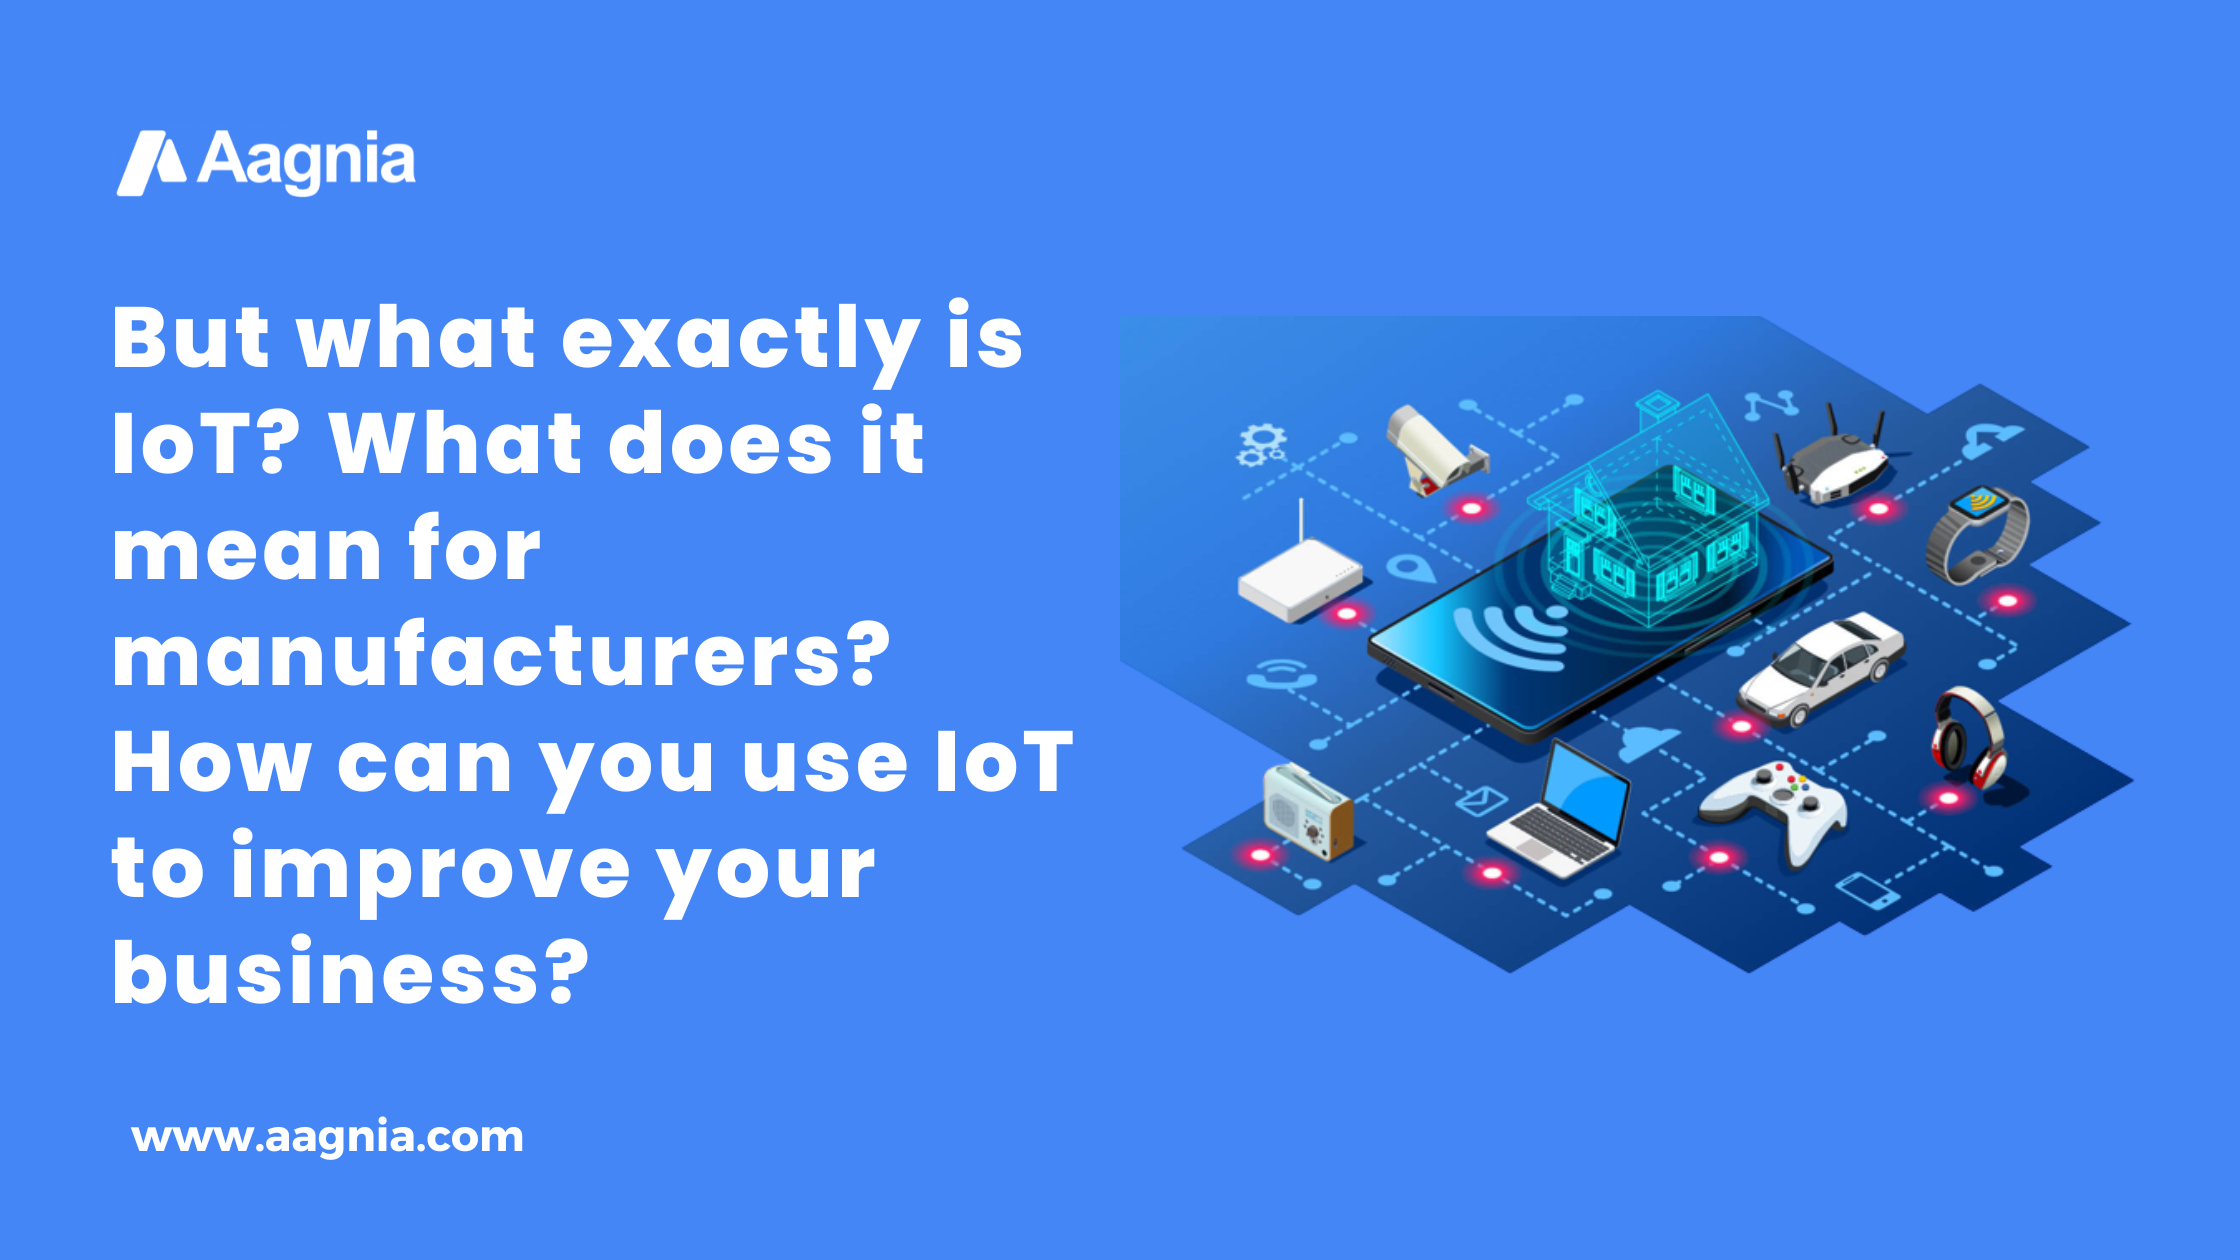 But what exactly is IoT? What does it mean for manufacturers? How can you use IoT to improve your business?